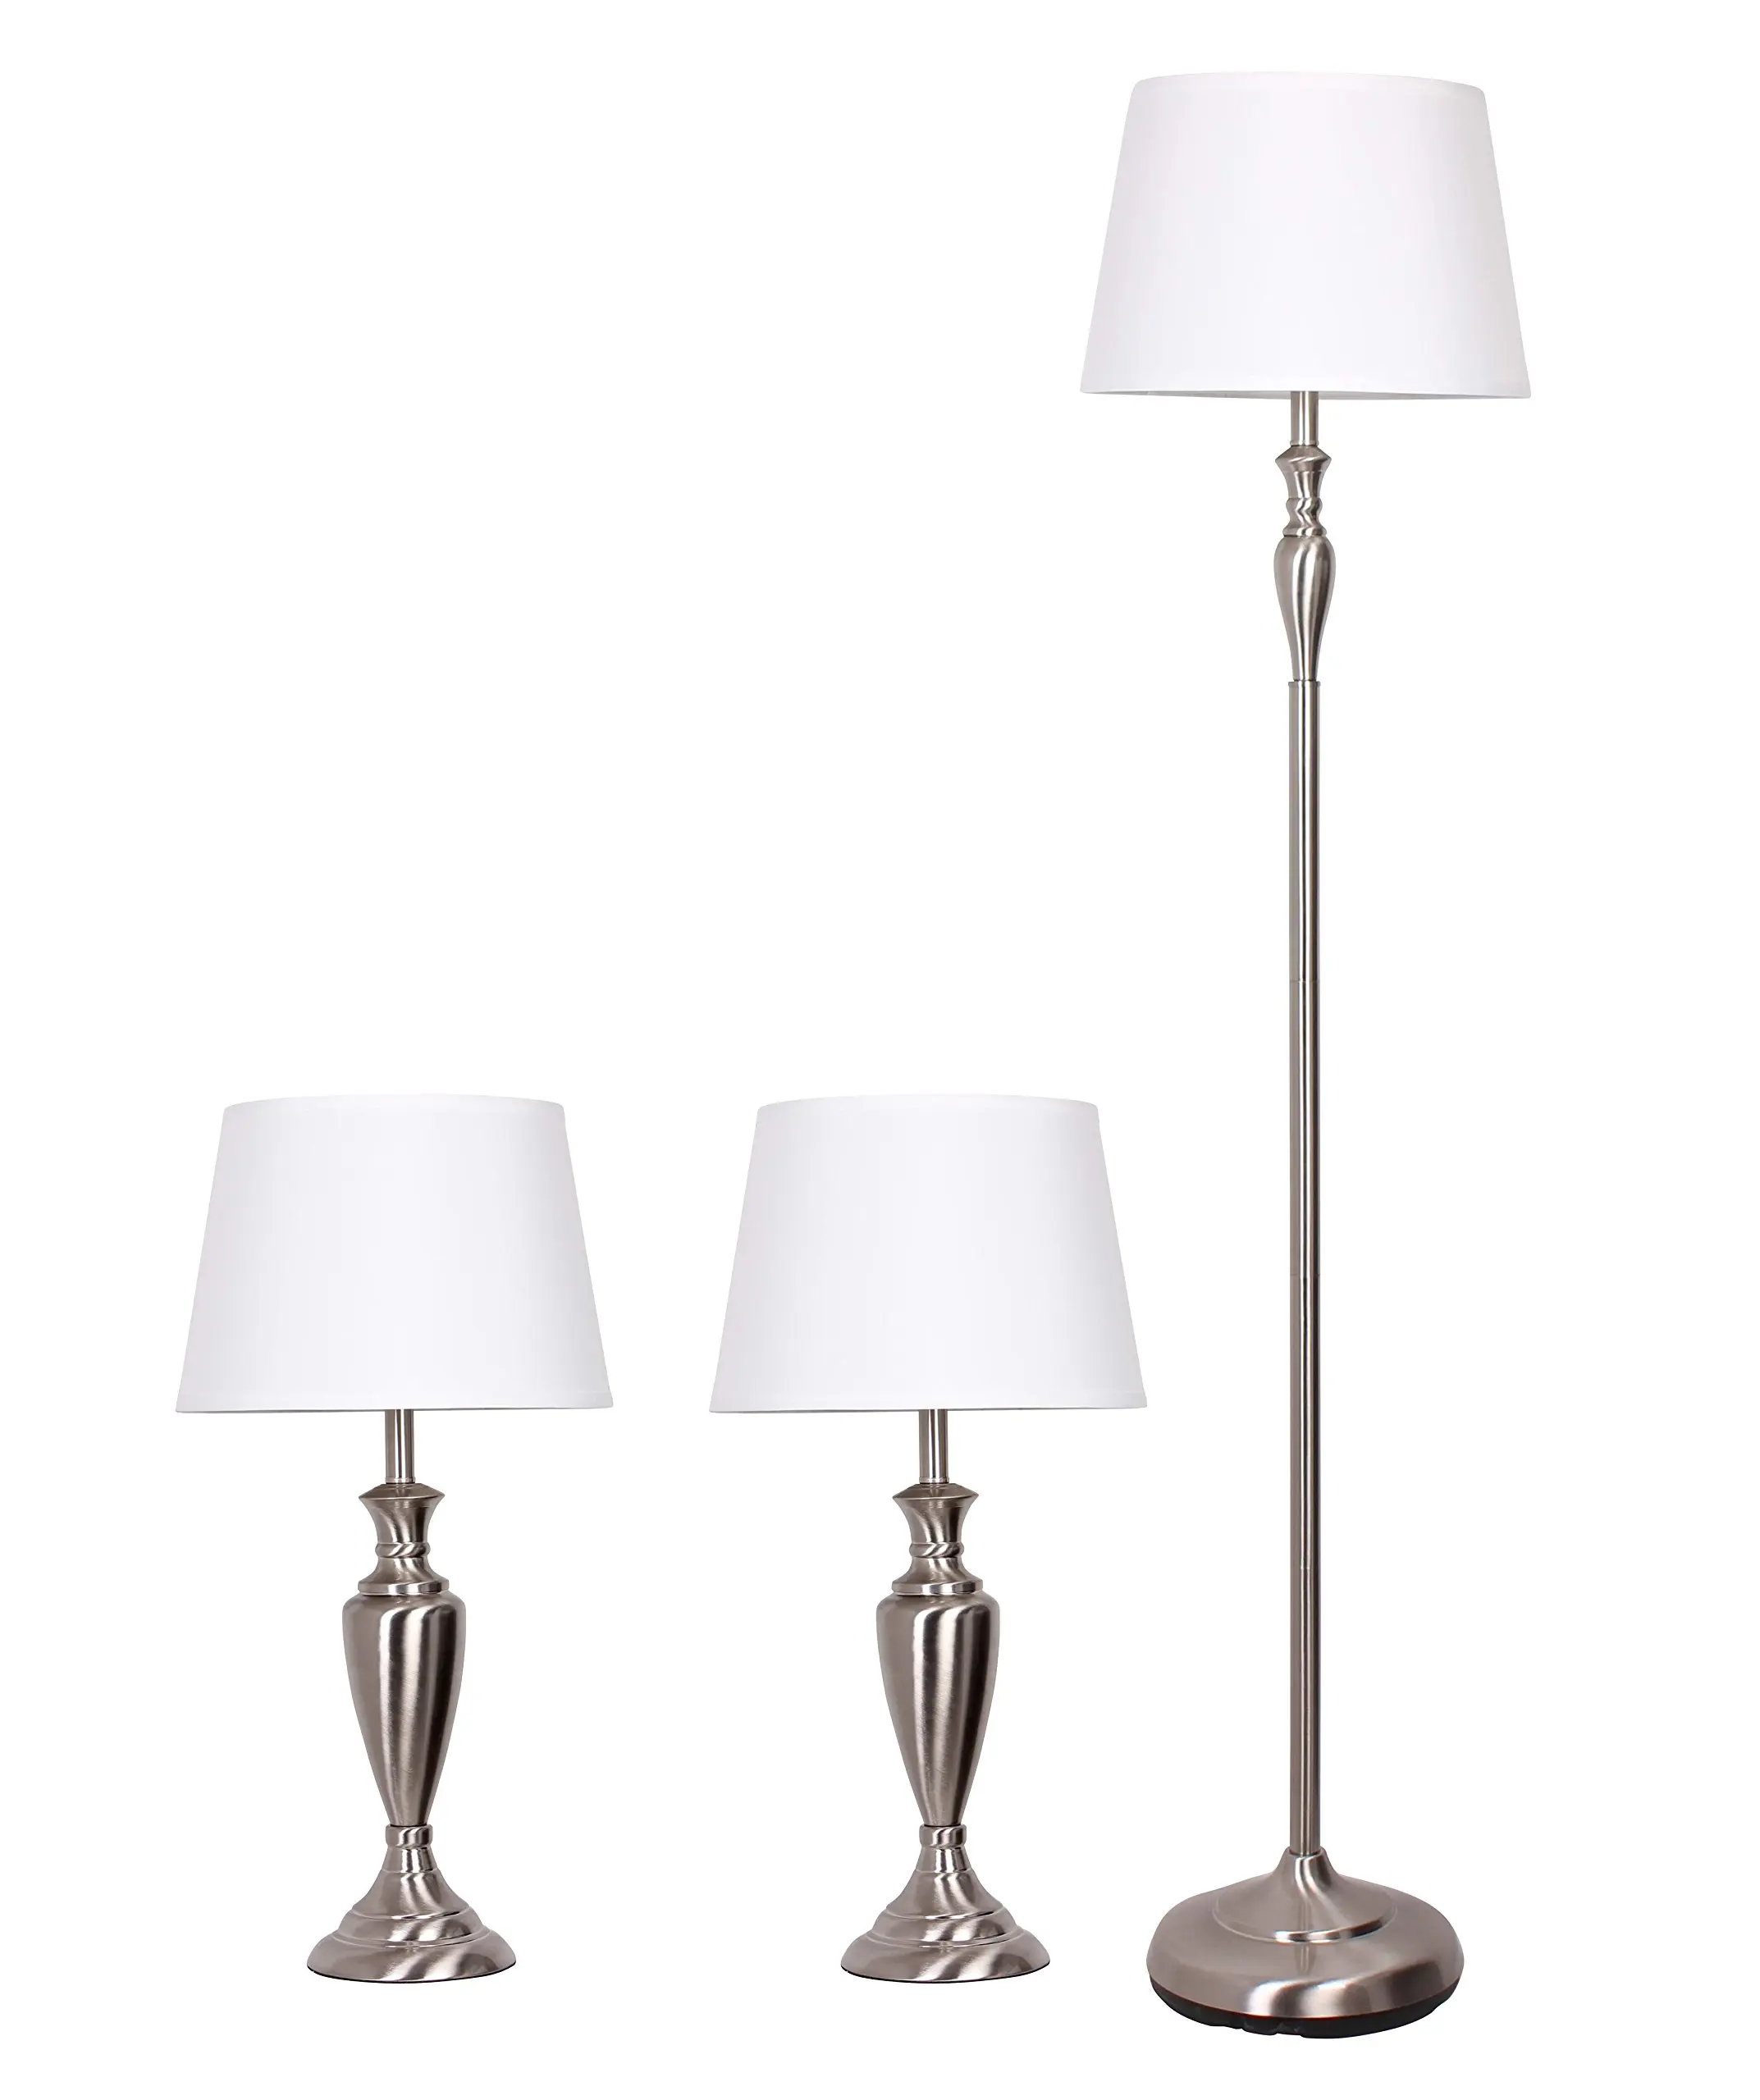 Cheap Lamp Shades For Floor Lamps Uk Find Lamp Shades For Floor